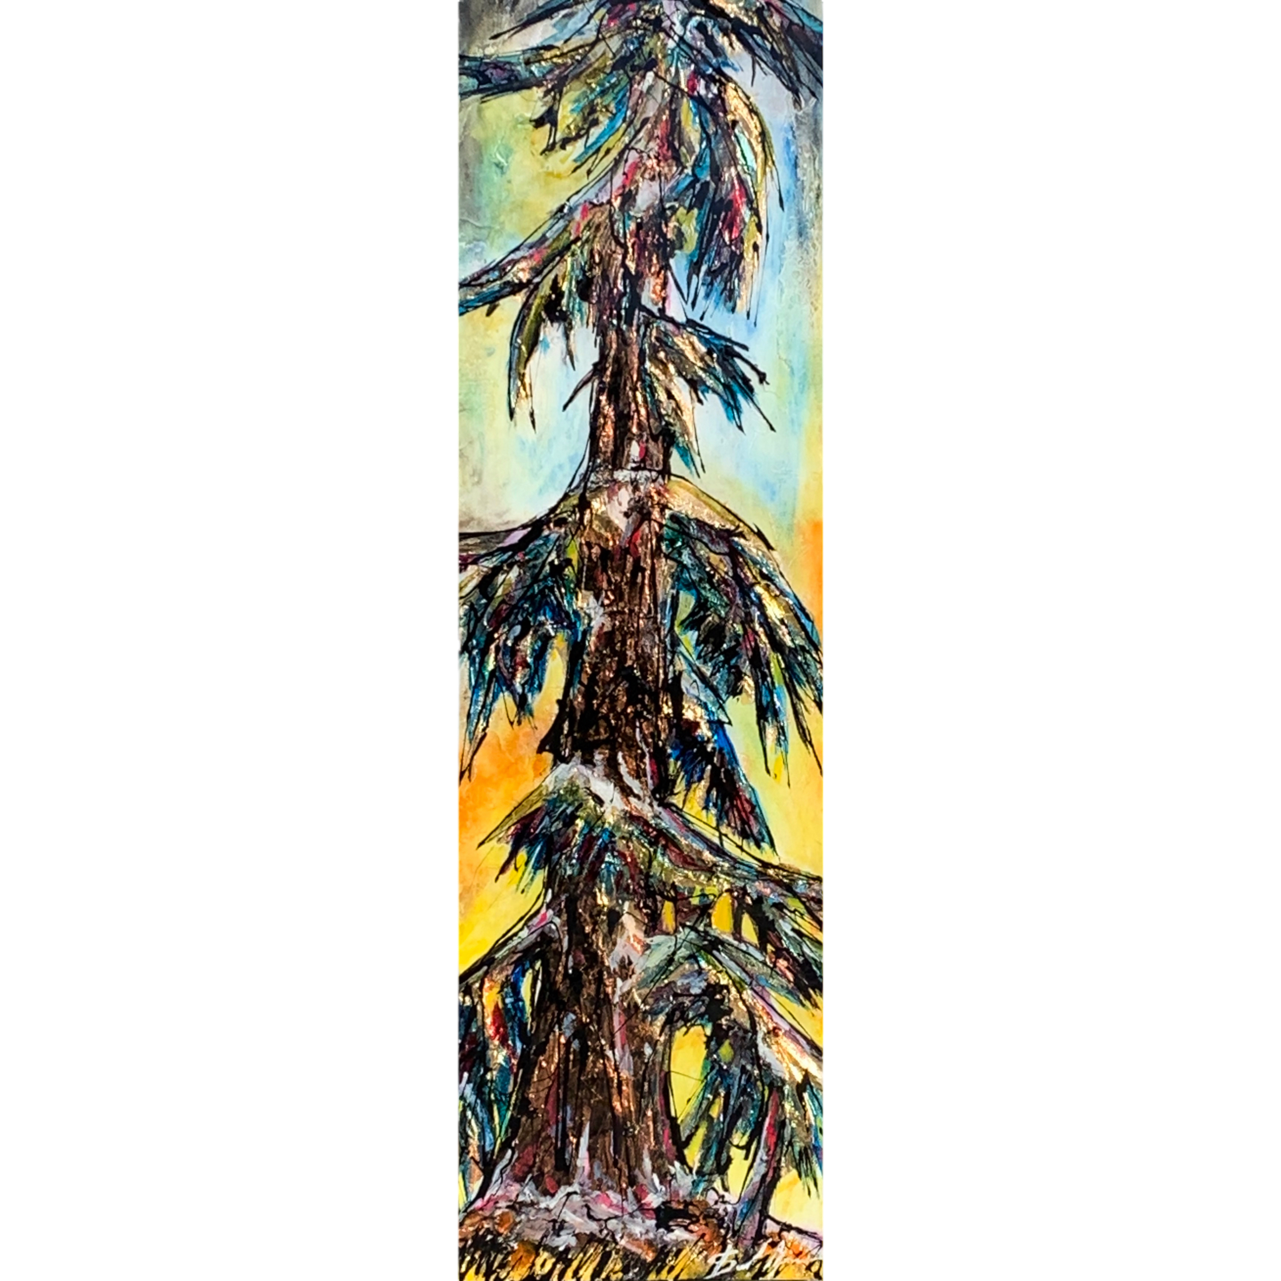 In the Past Again, original mixed media tree painting by David Zimmerman | Effusion Art Gallery in Invermere, BC